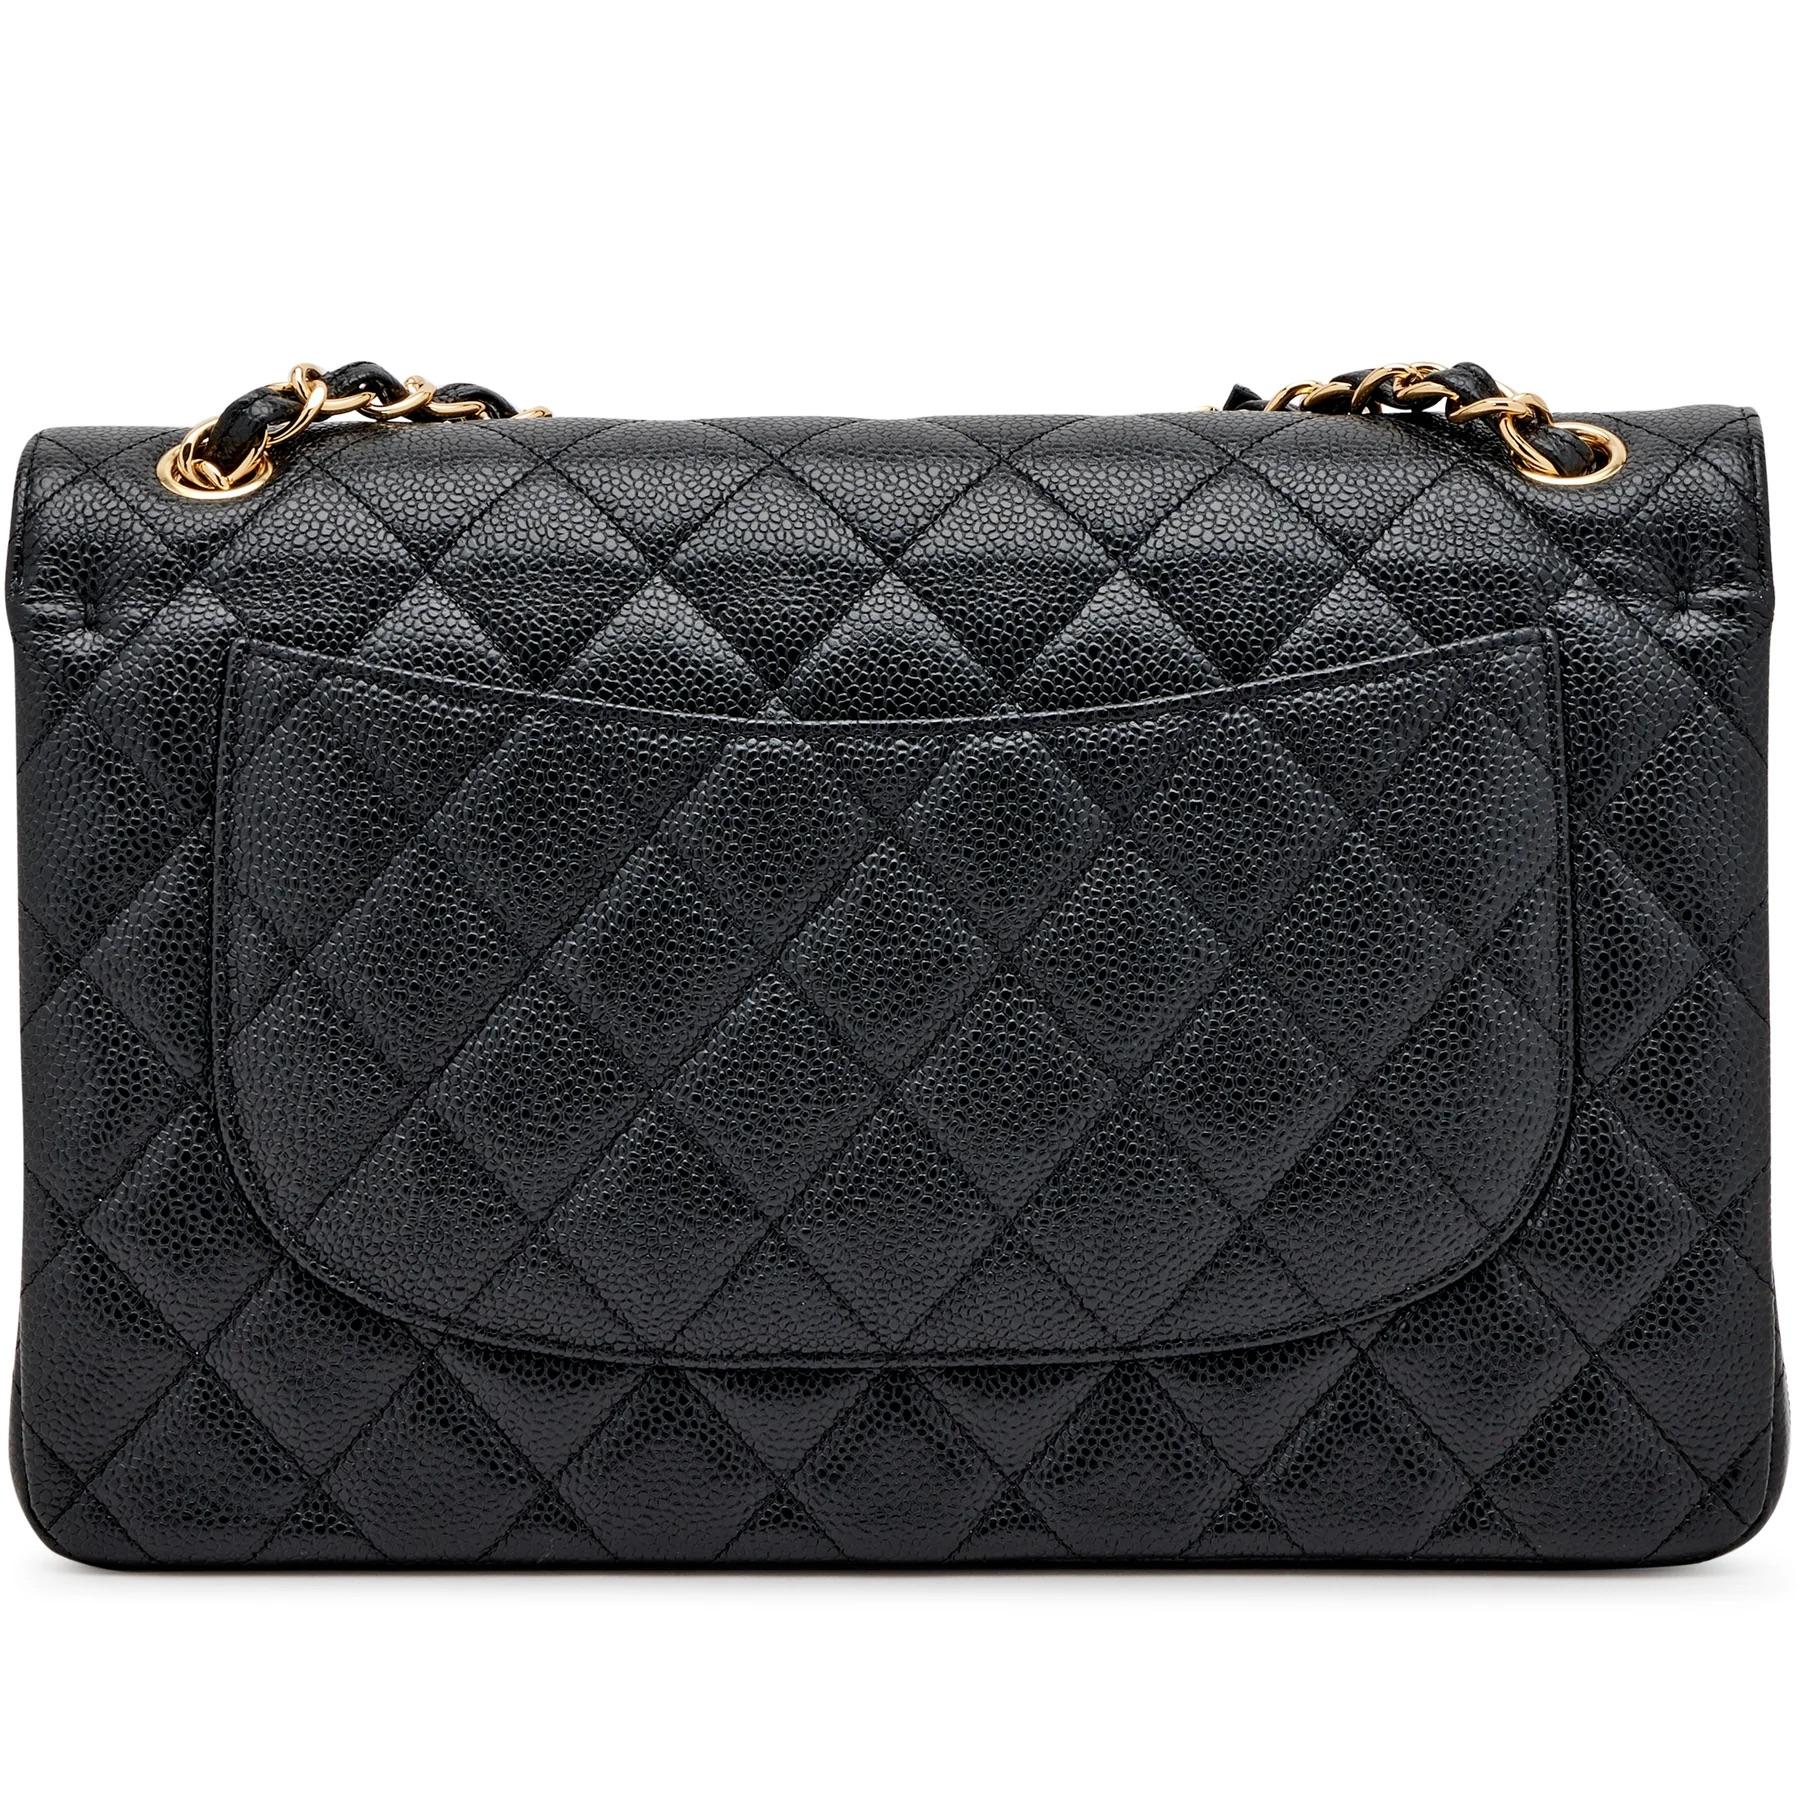 Timeless Elegance: This bag is a timeless classic that has been a staple in the fashion world for decades. Its design is instantly recognizable and exudes elegance.

Size: The Jumbo Classic Double Flap Bag is larger than the Medium and Small sizes,